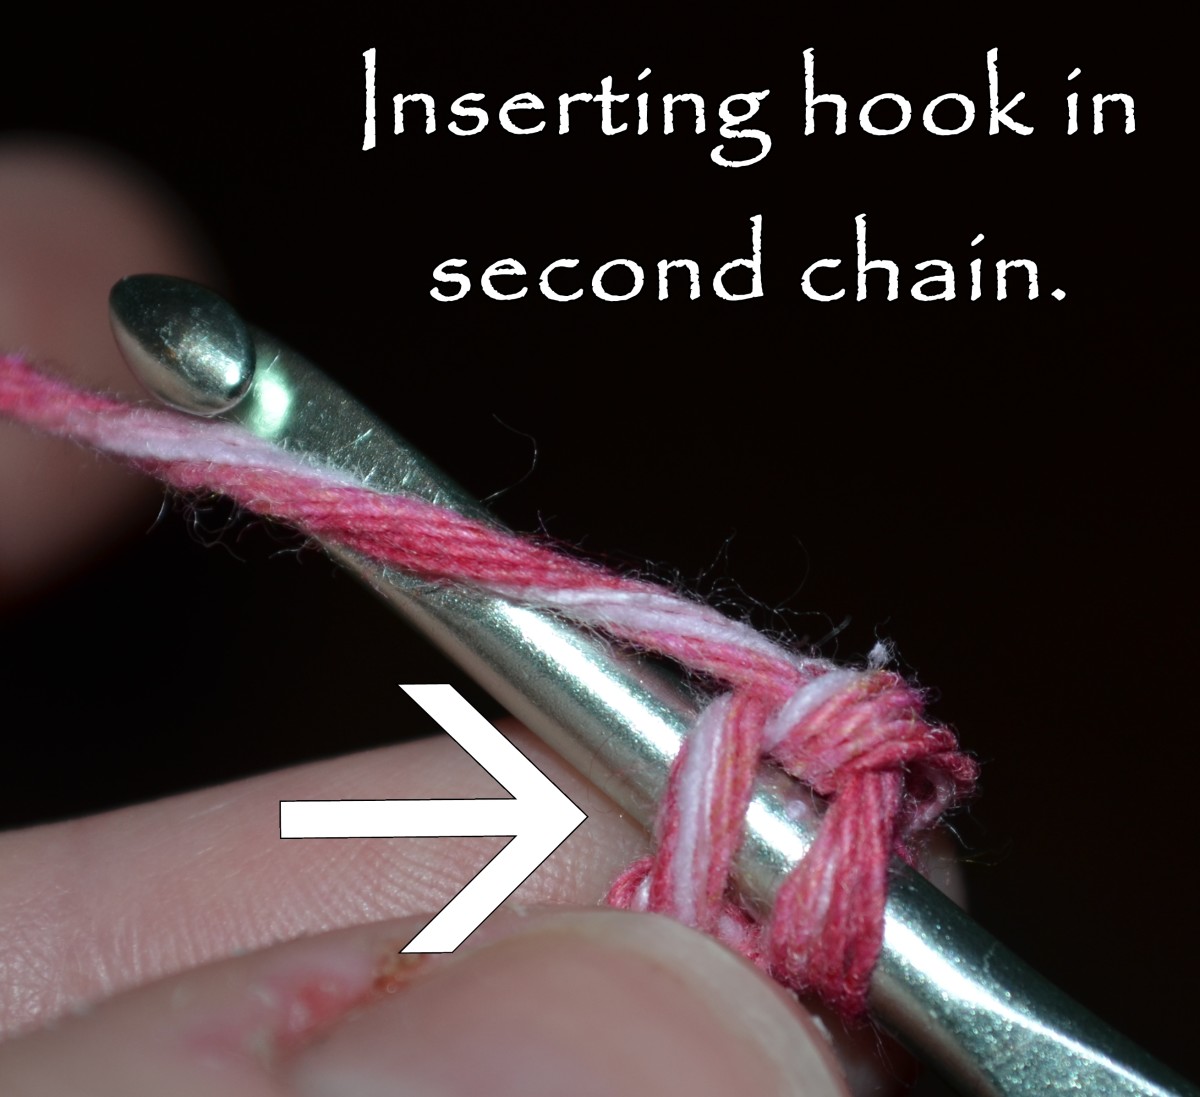 Here is another angle of inserting the hook in the second chain.